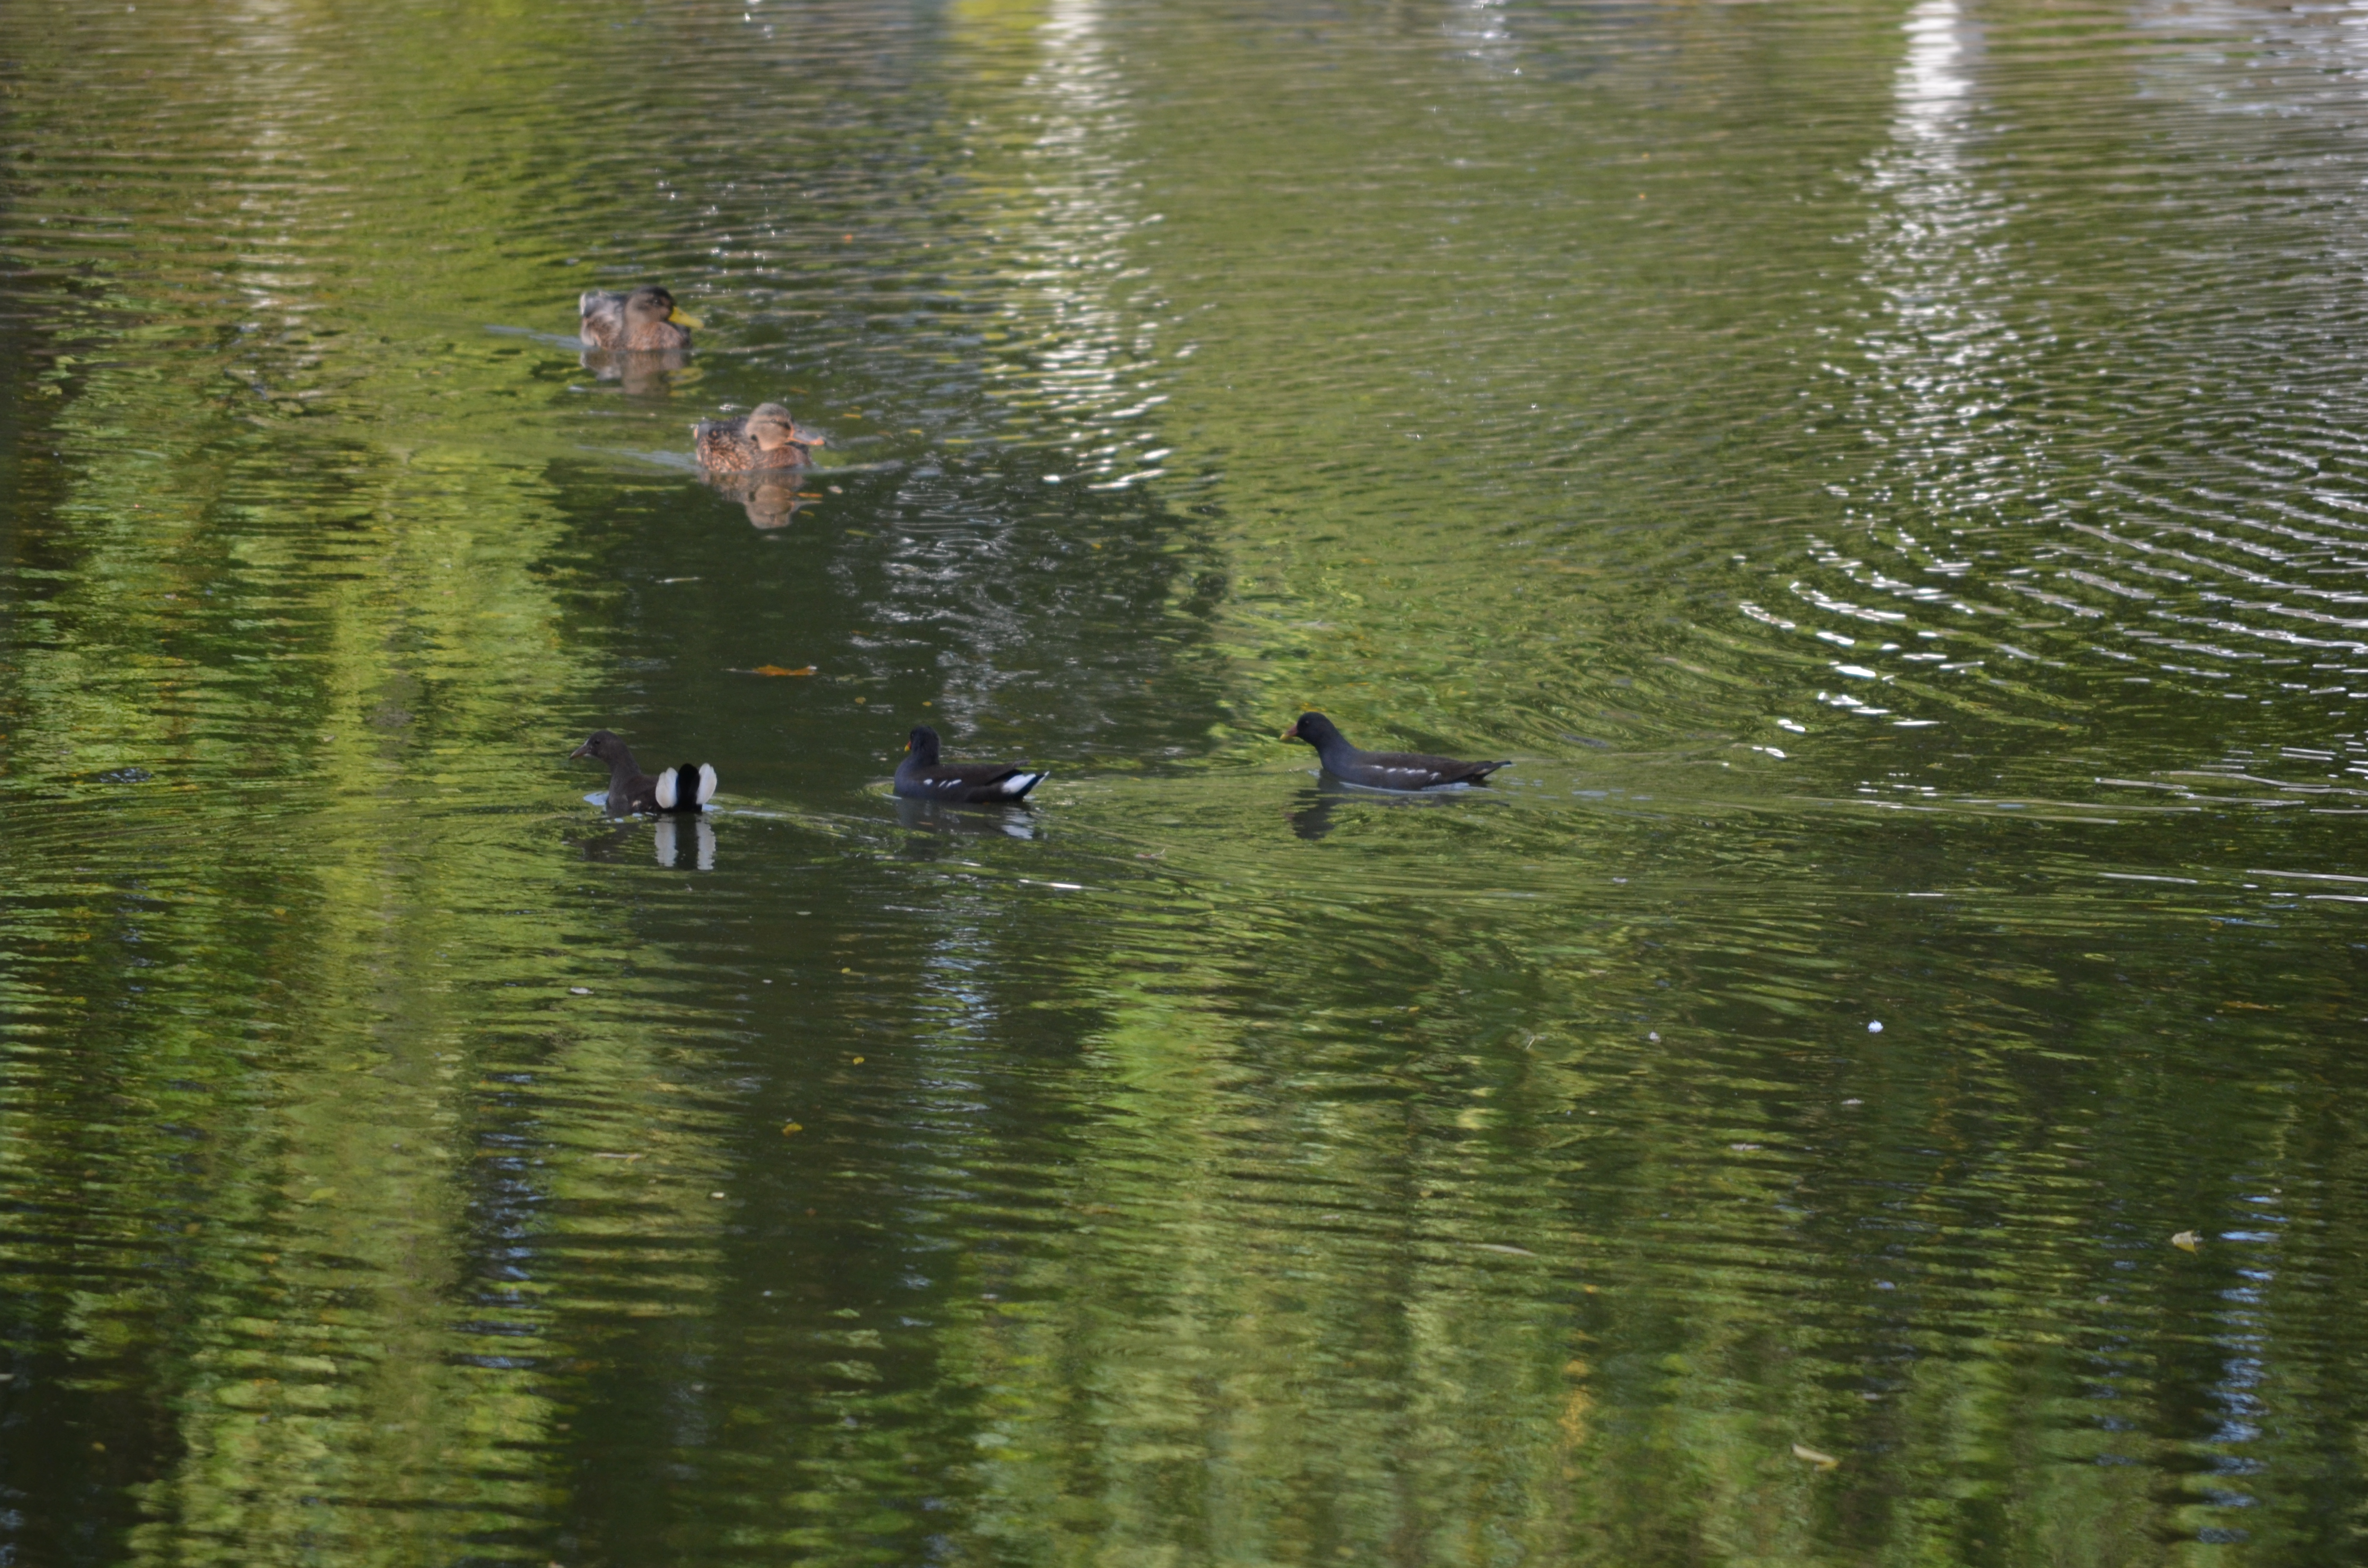 The young Moorhens without their parents, now fully independant.  Worryingly there was no sign of their parents or their two younger siblings.